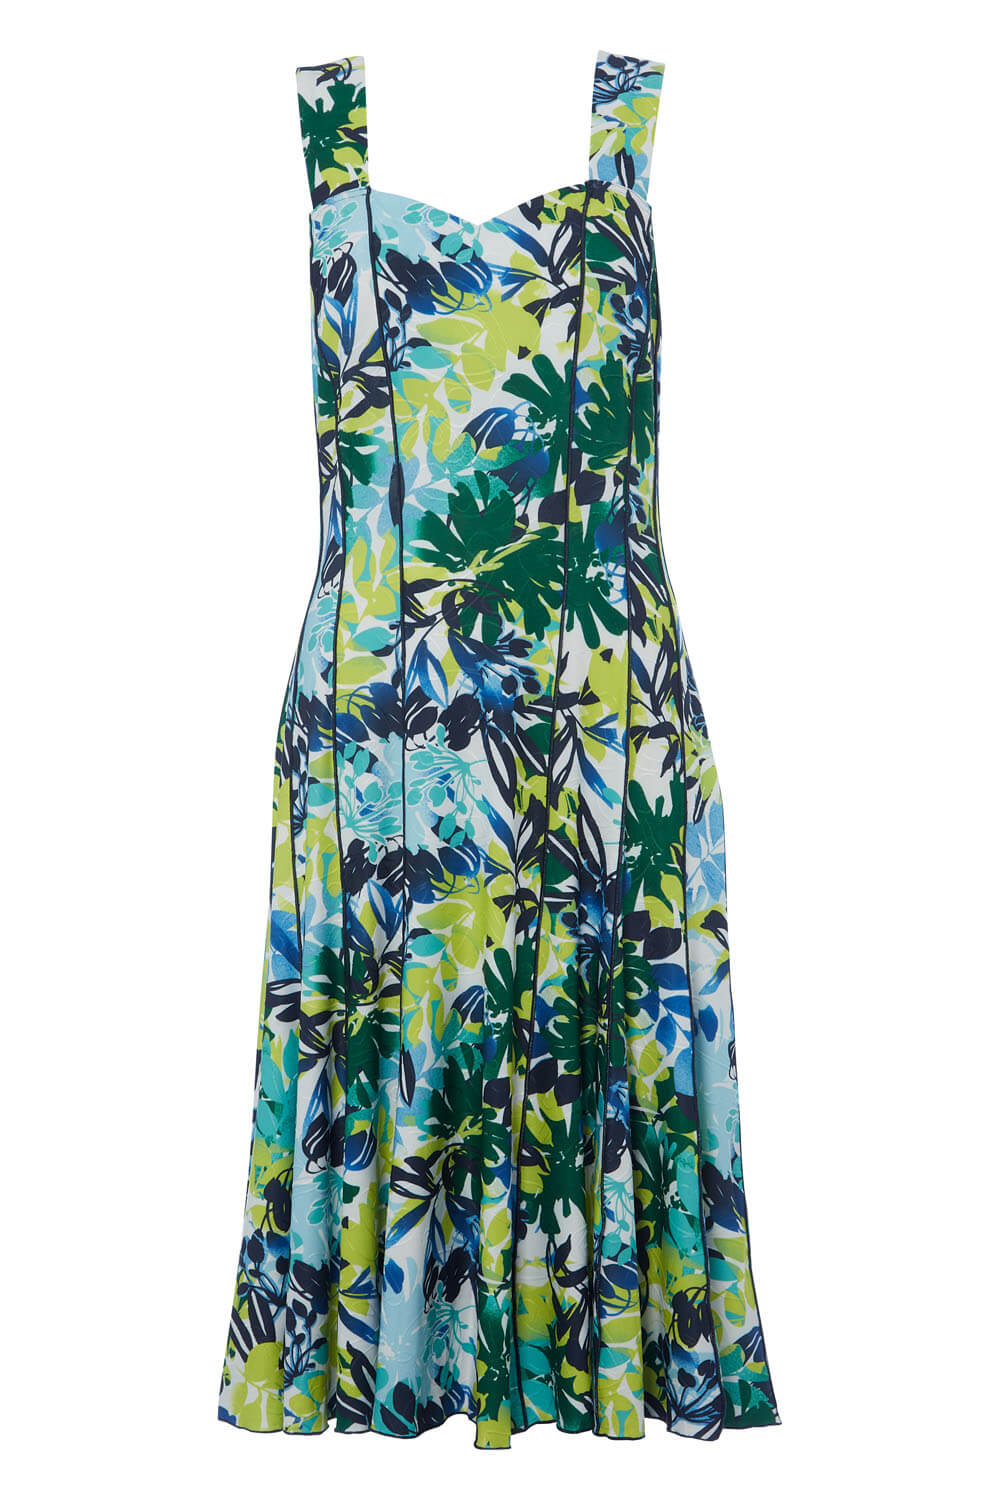 Lime Abstract Leaf Panel Dress, Image 5 of 5